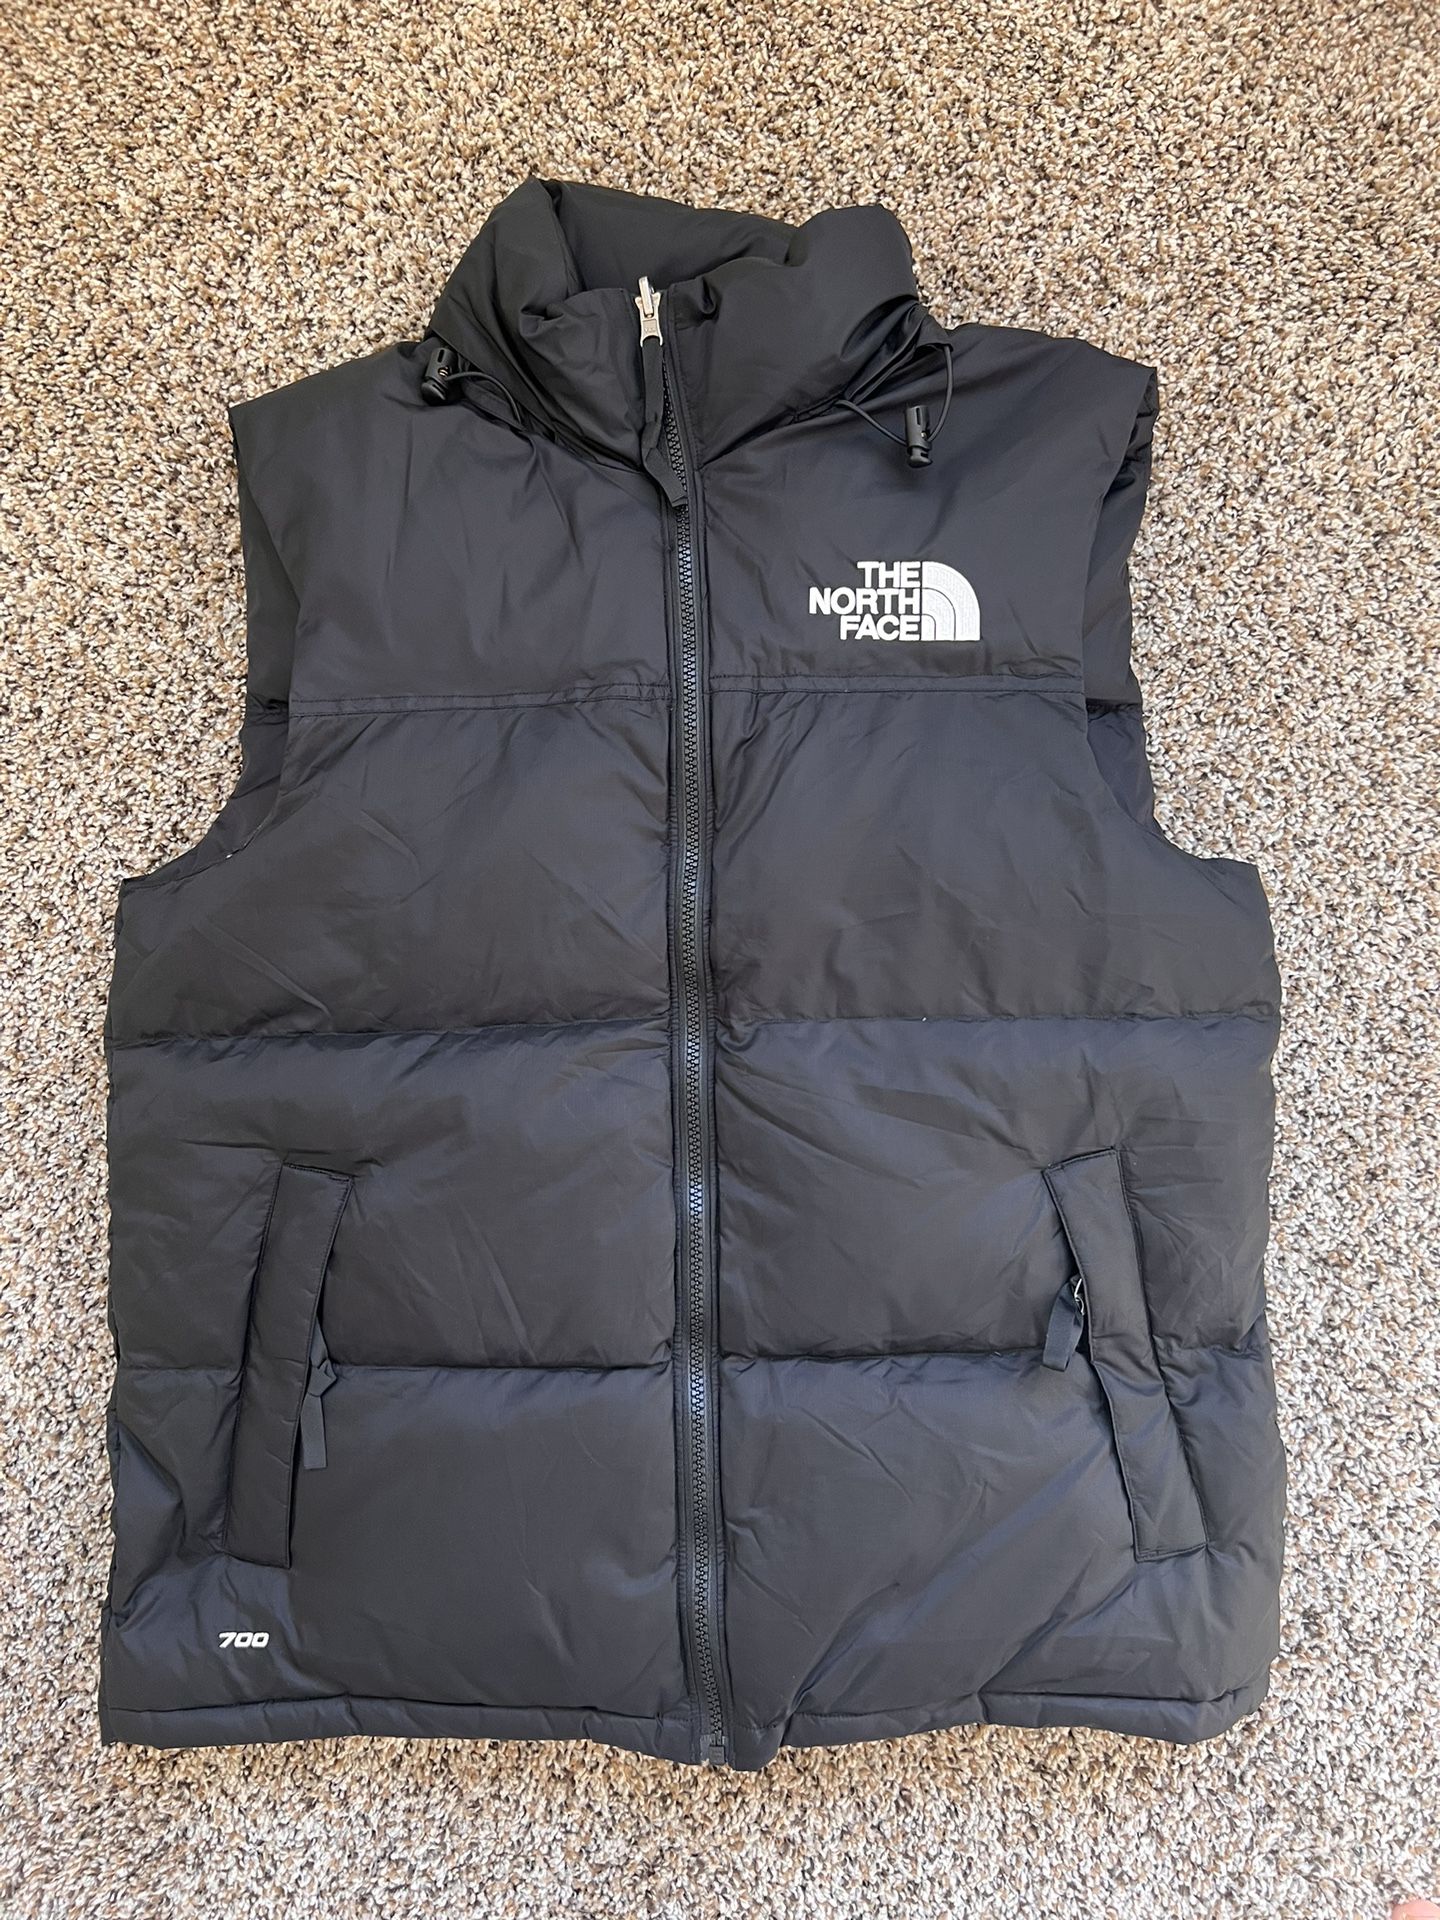 (Unisex)The North Face 700 Series Nuptse Puffer Vest - Size S